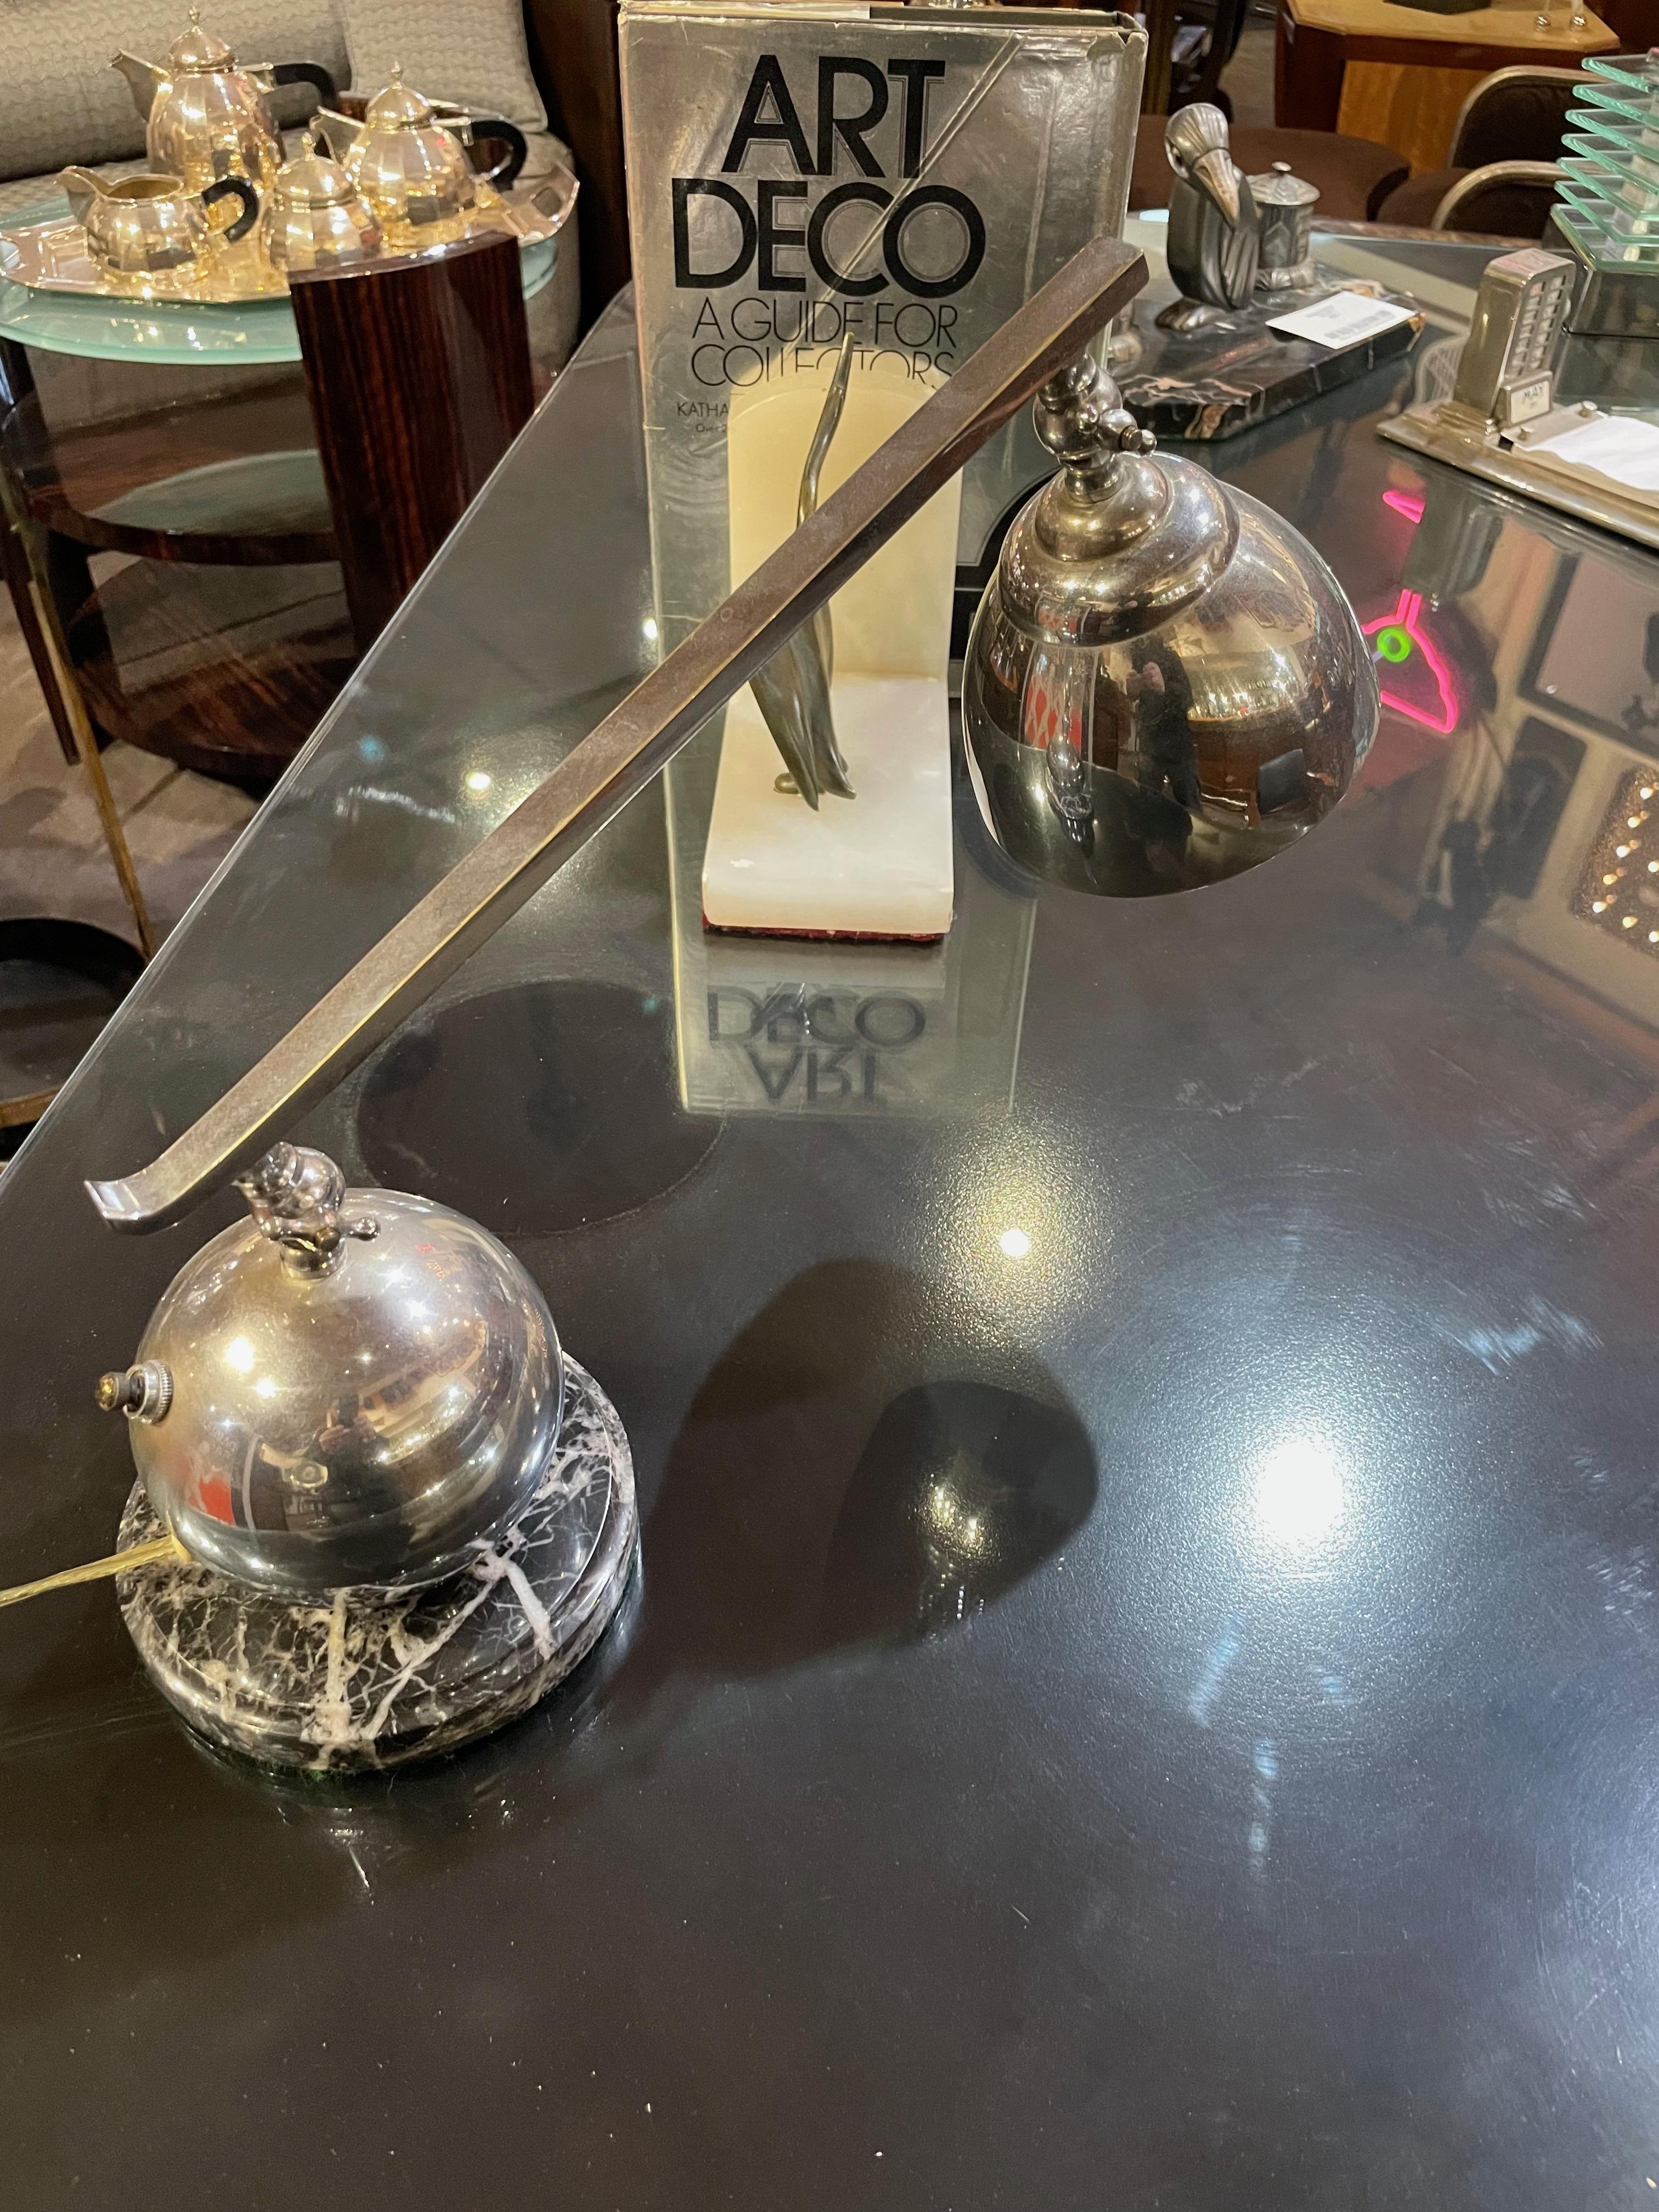 Art Deco desk lamp Industrial Countertop light. An ingenious design and the counterbalanced arms move smoothly and efficiently and stay precisely where you want them. Not the typical Industrial style table lamp, this one is much more refined in